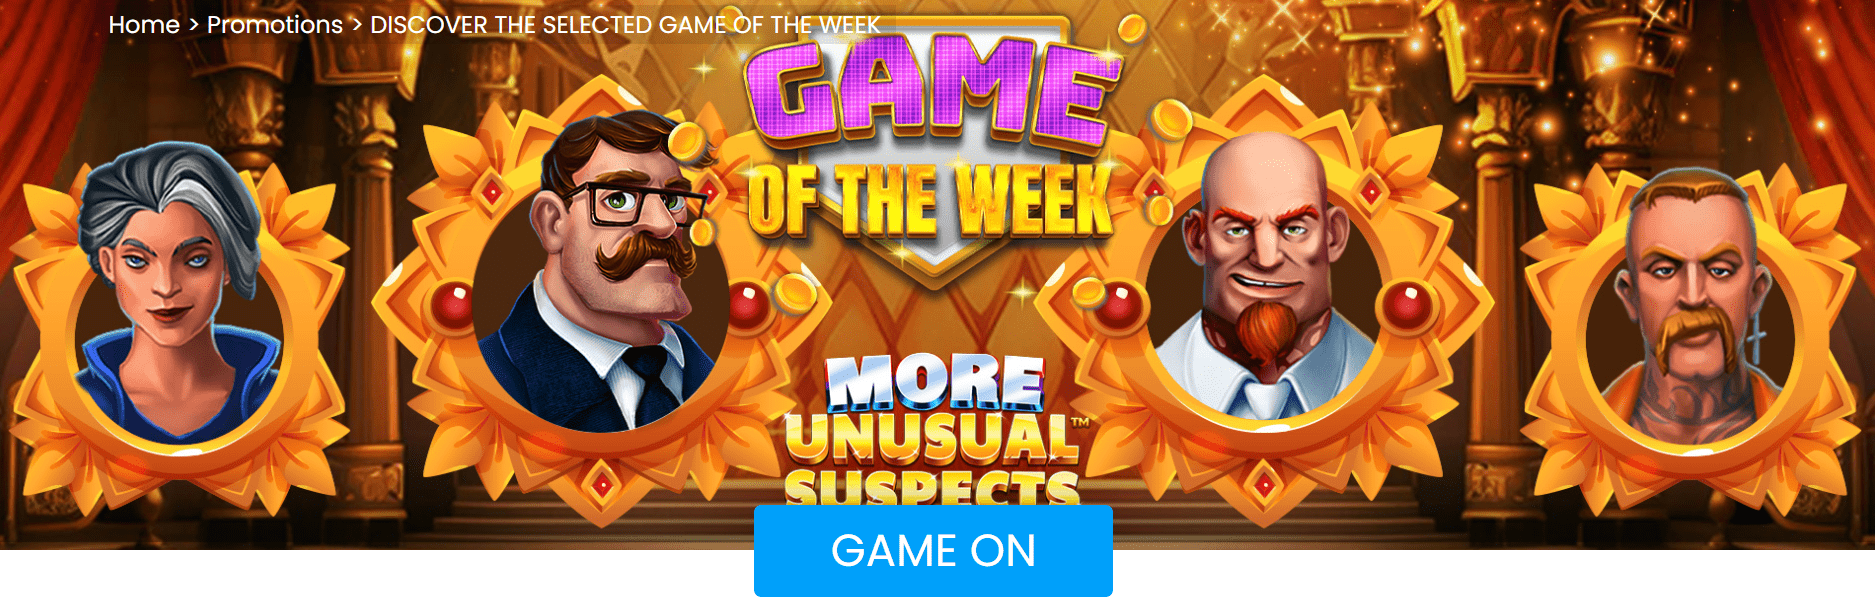 mr play casino game of the week